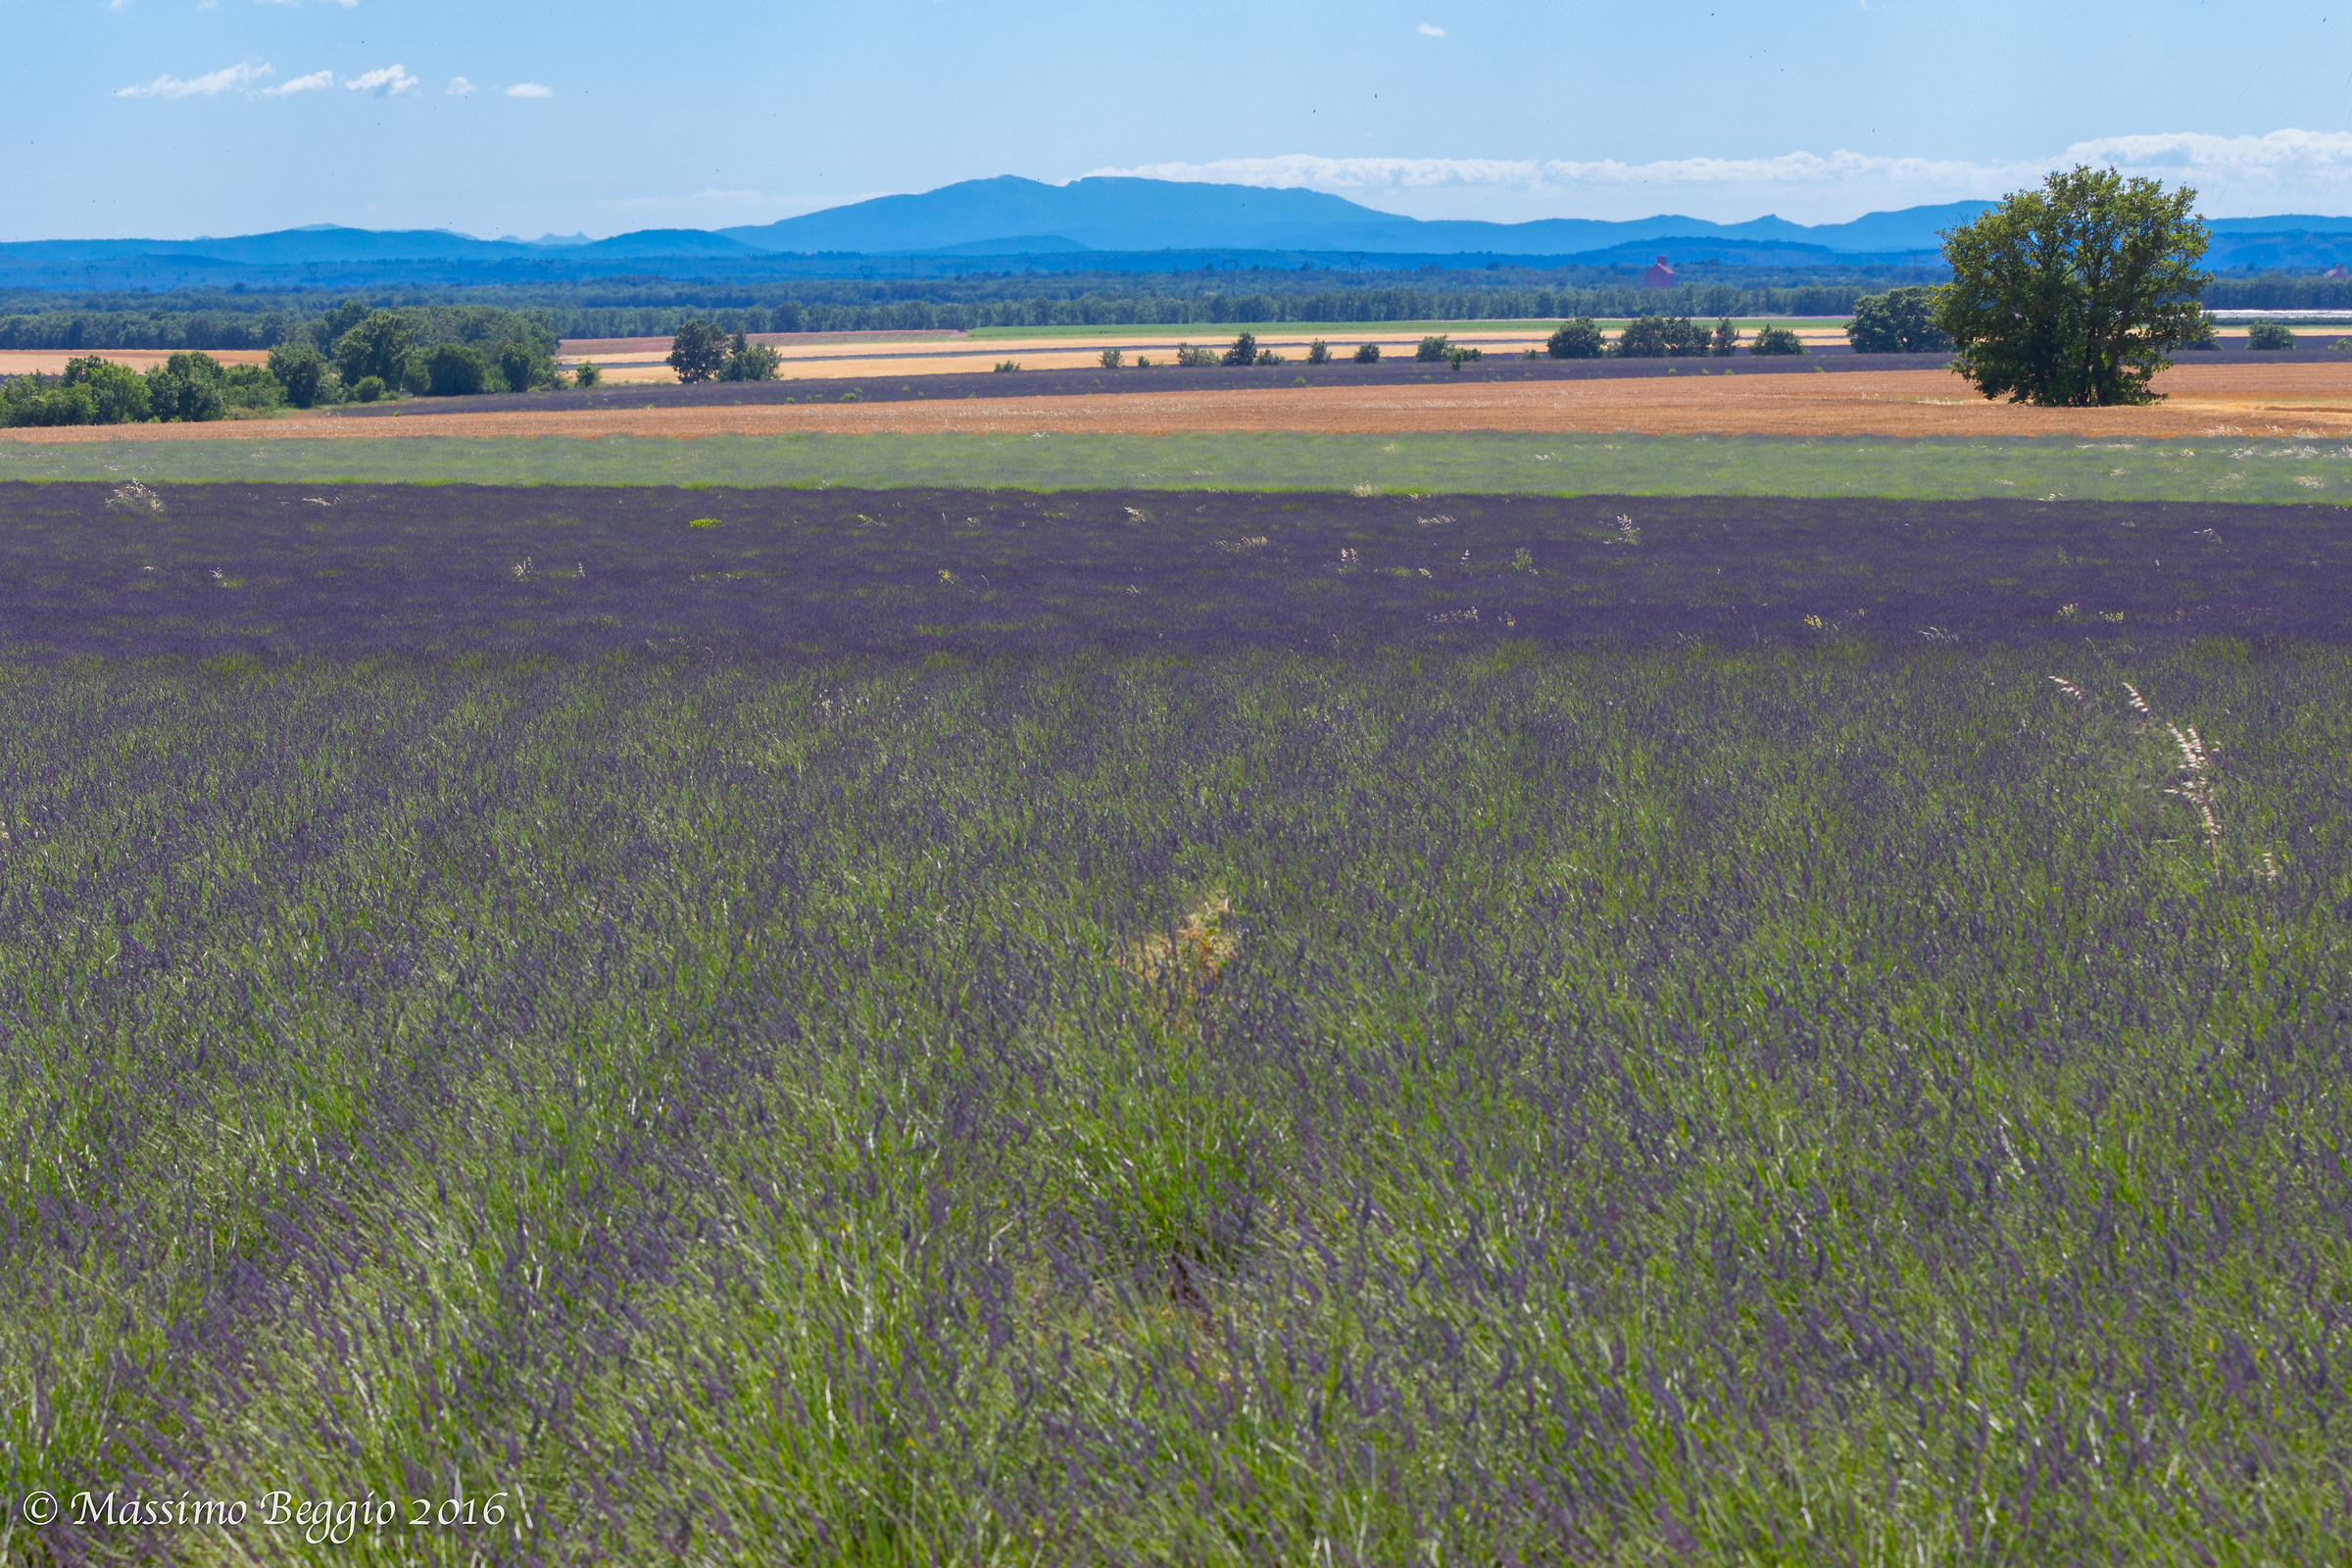 The colors of Provence...